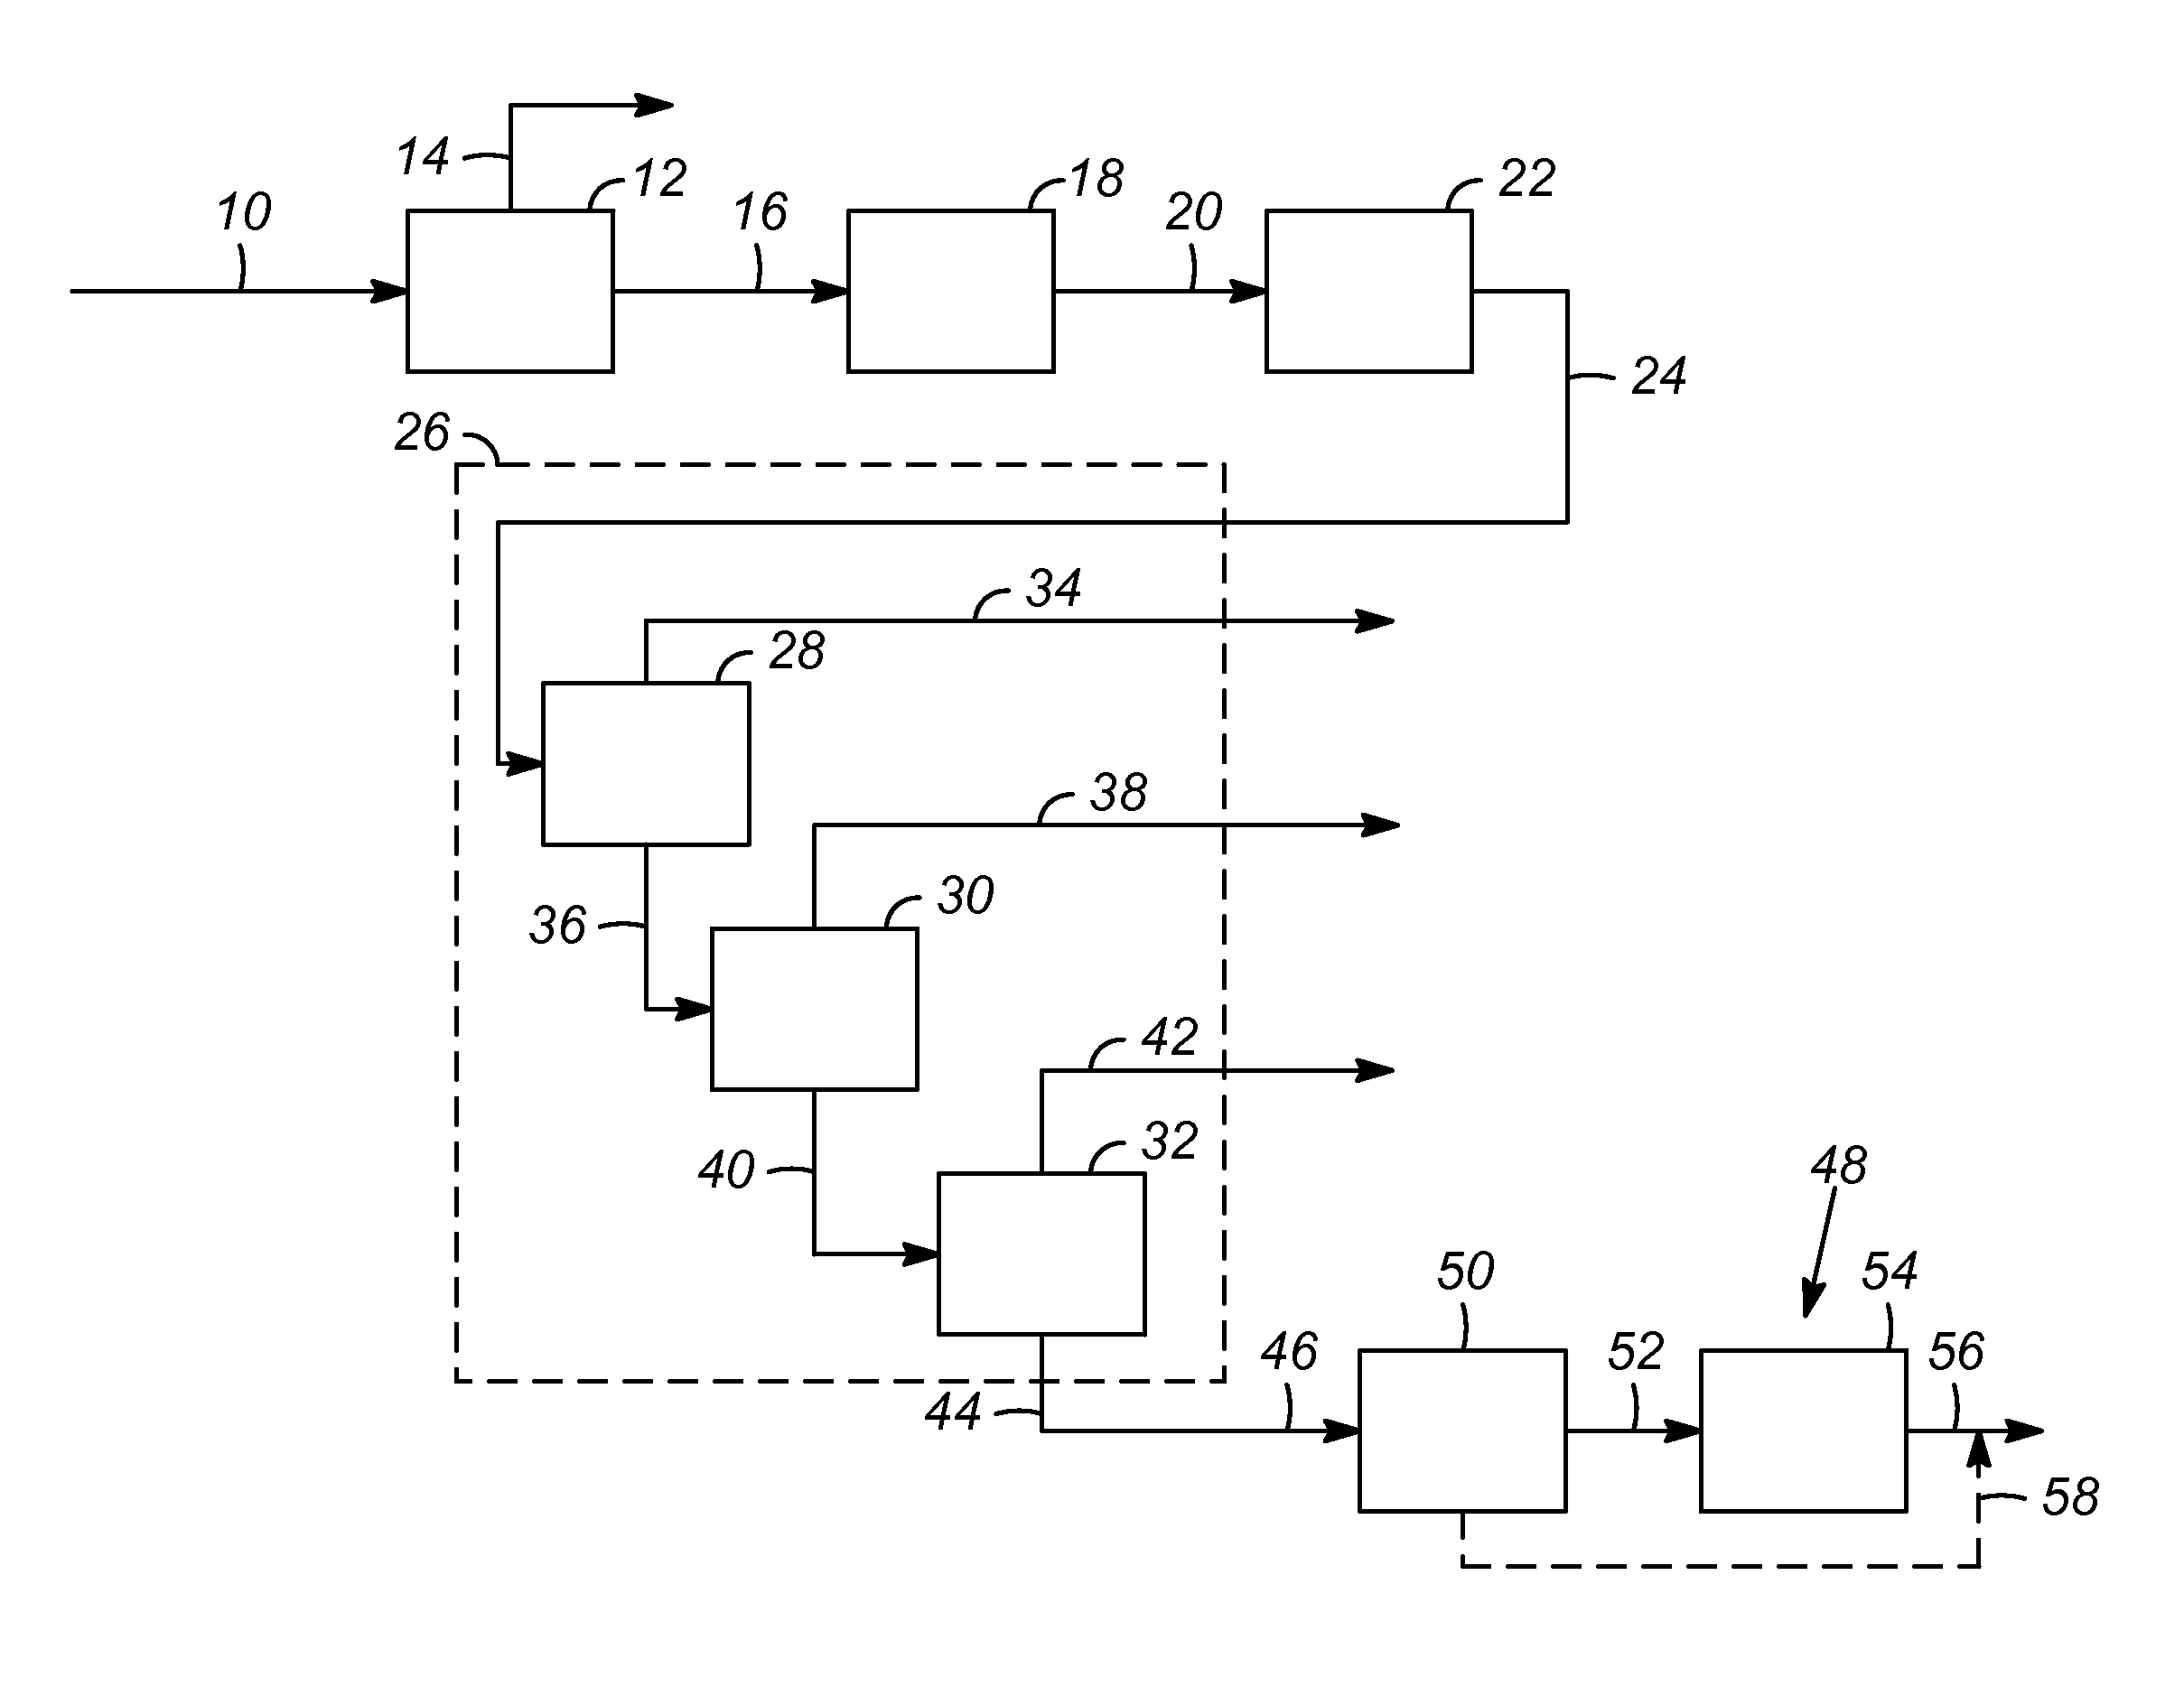 Process for producing a sweetened hydrocarbon stream